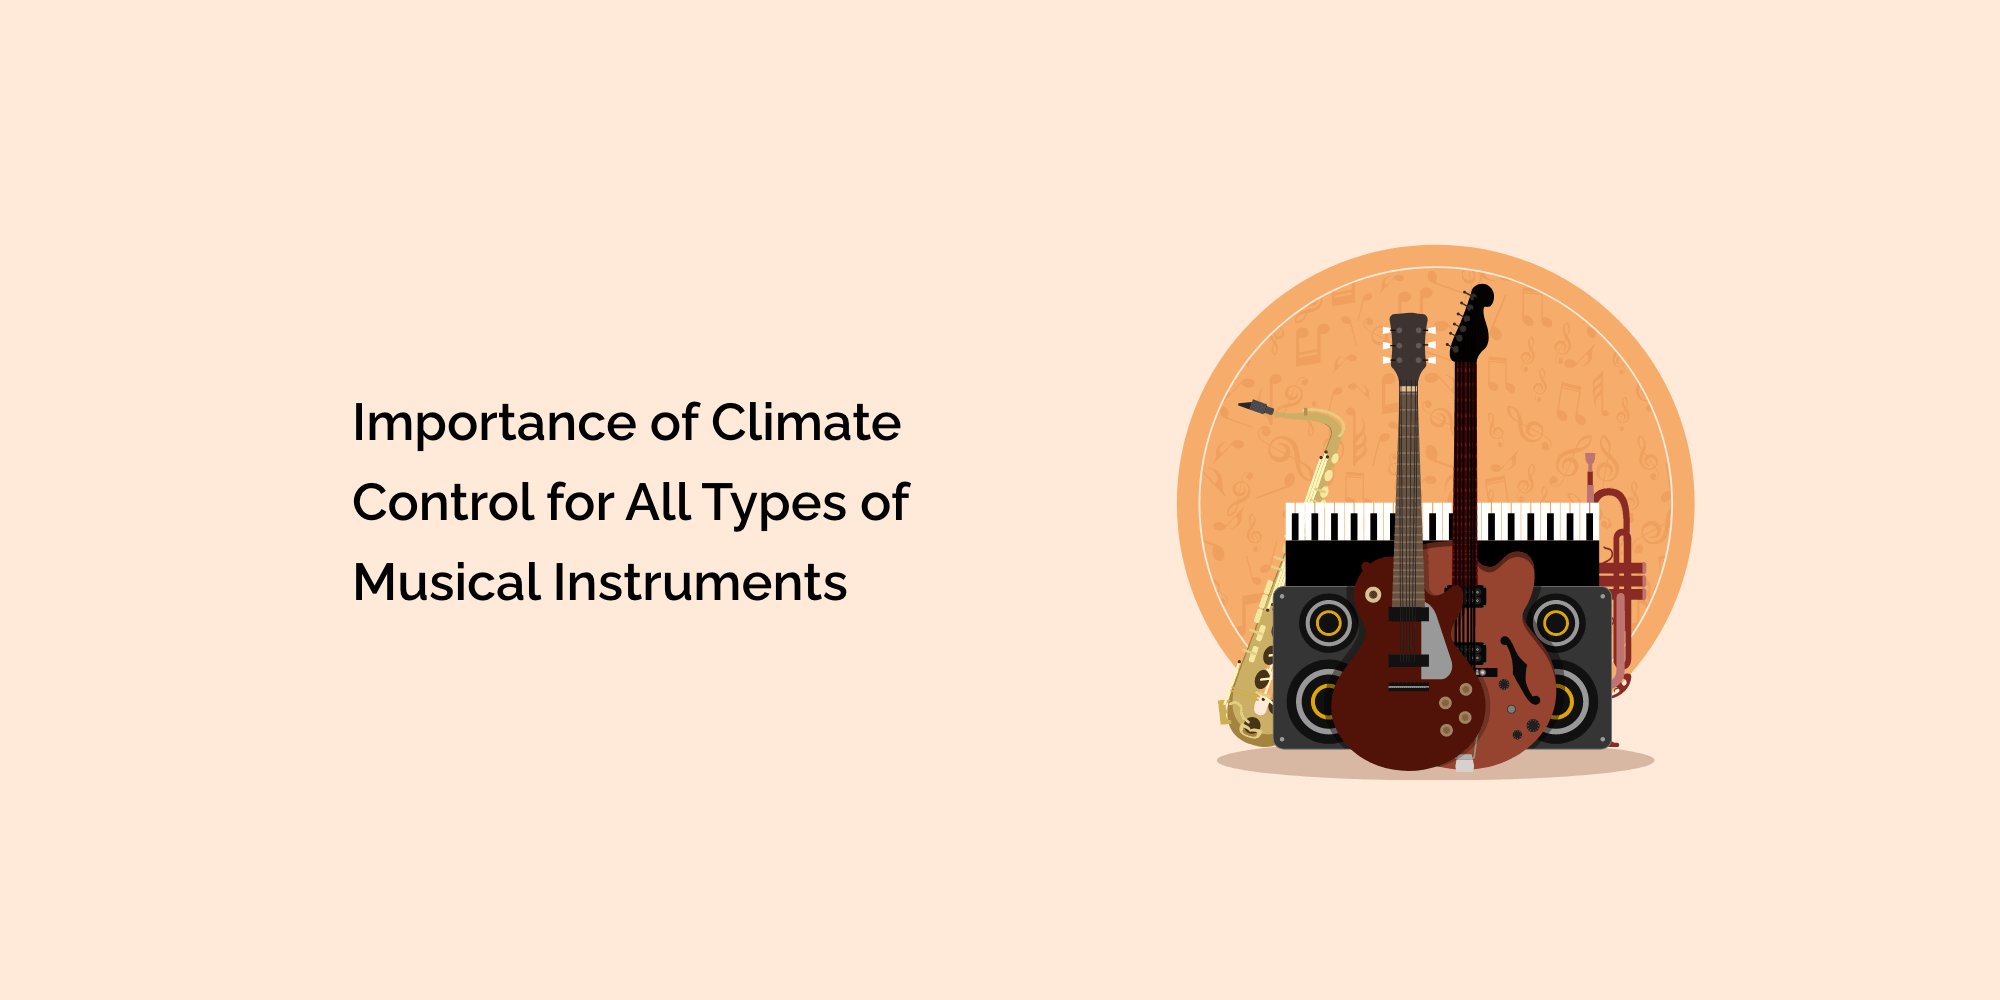 Importance of Climate Control for All Types of Musical Instruments